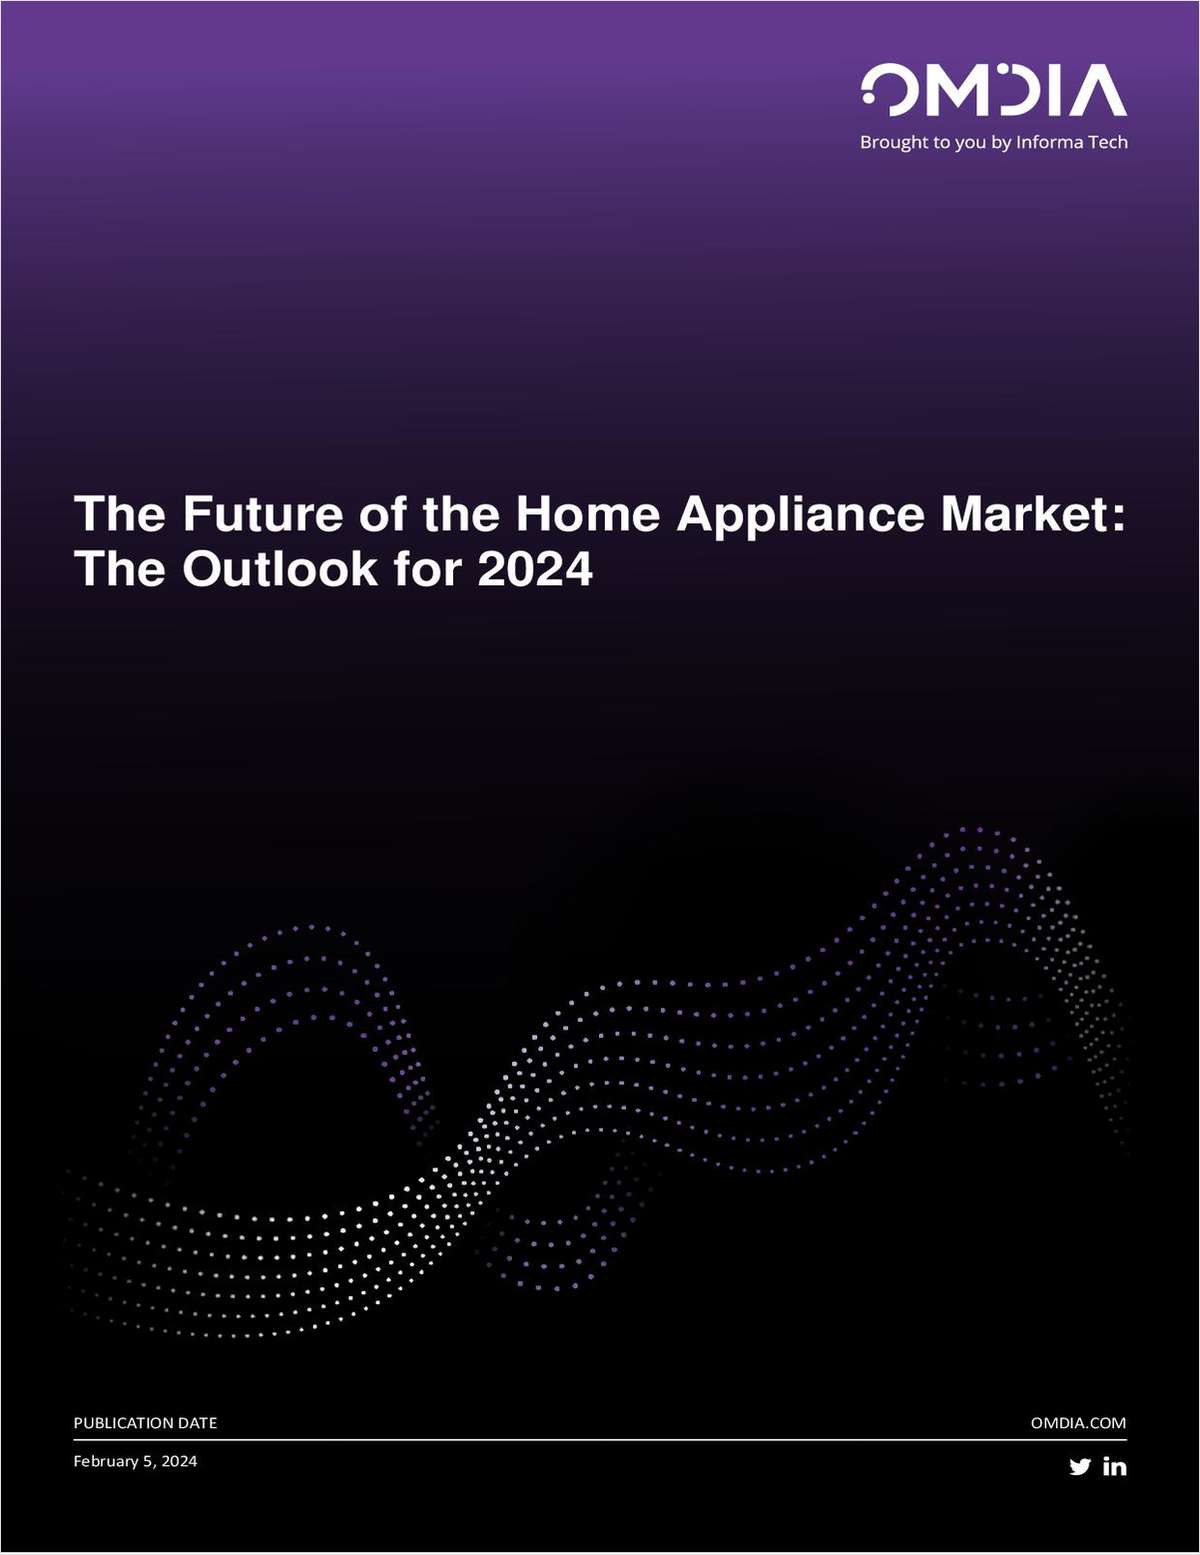 The Future of the Home Appliance Market - 2024 Outlook